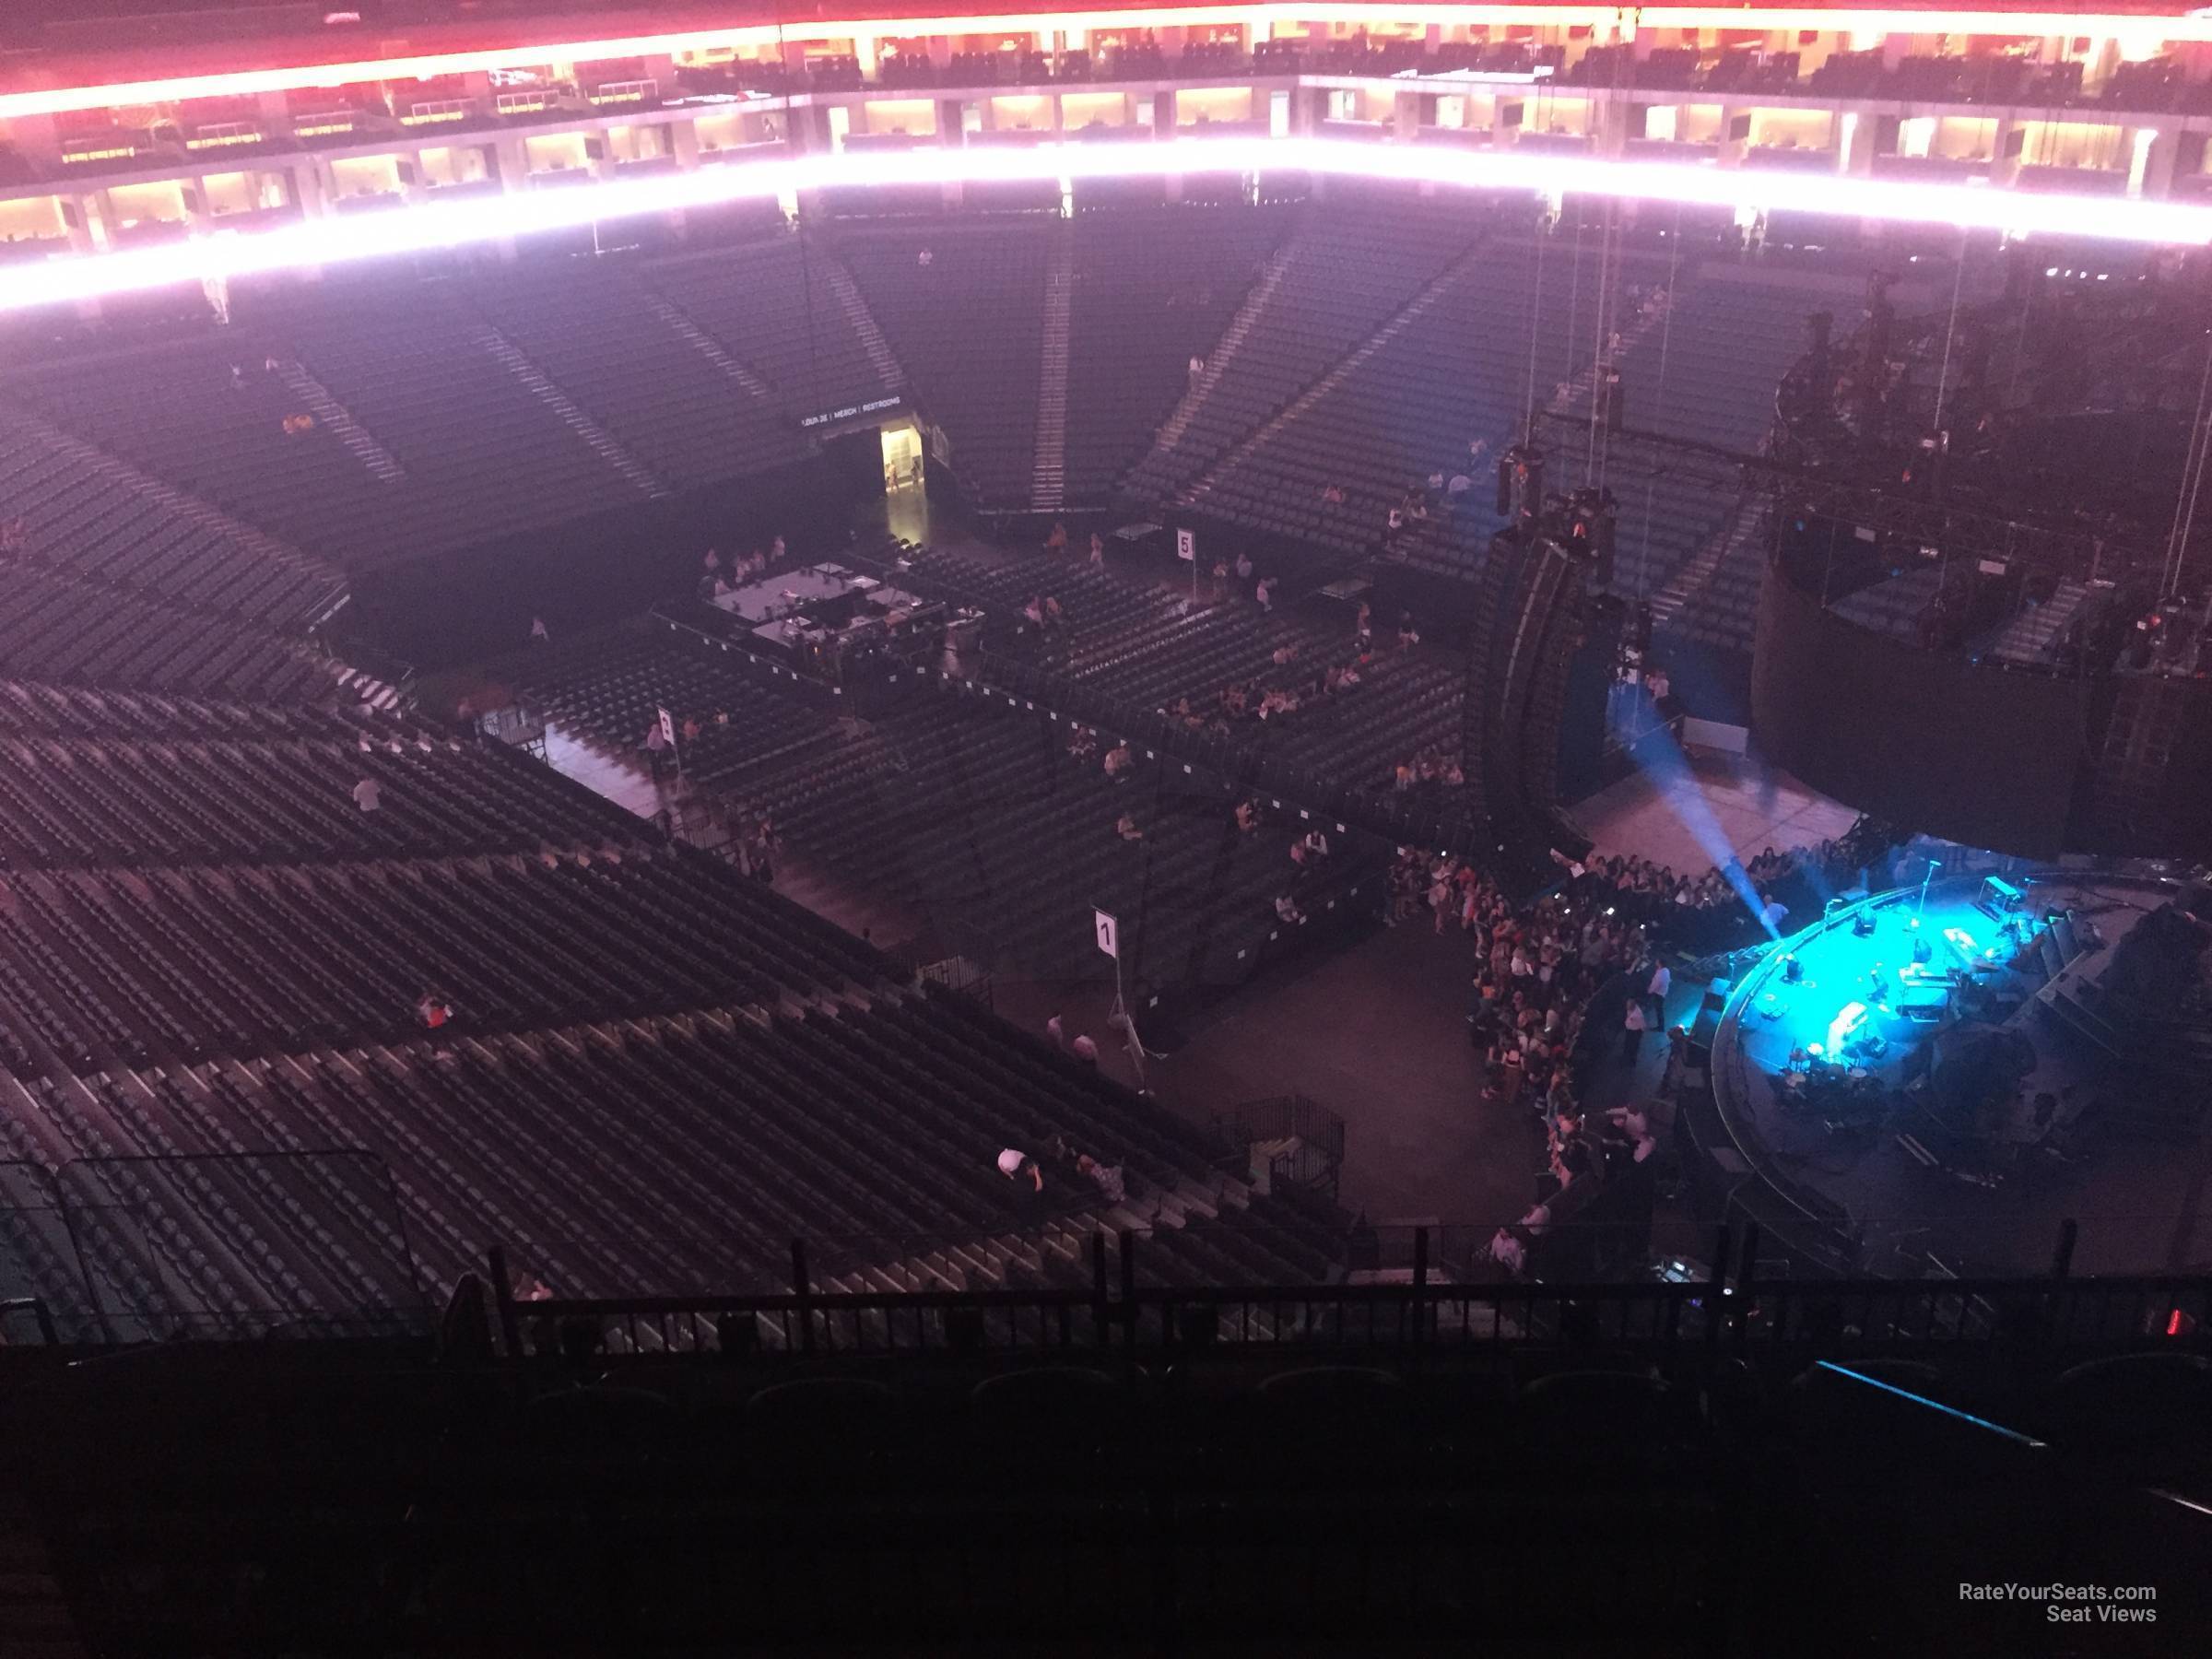 section 202, row l seat view  for concert - golden 1 center